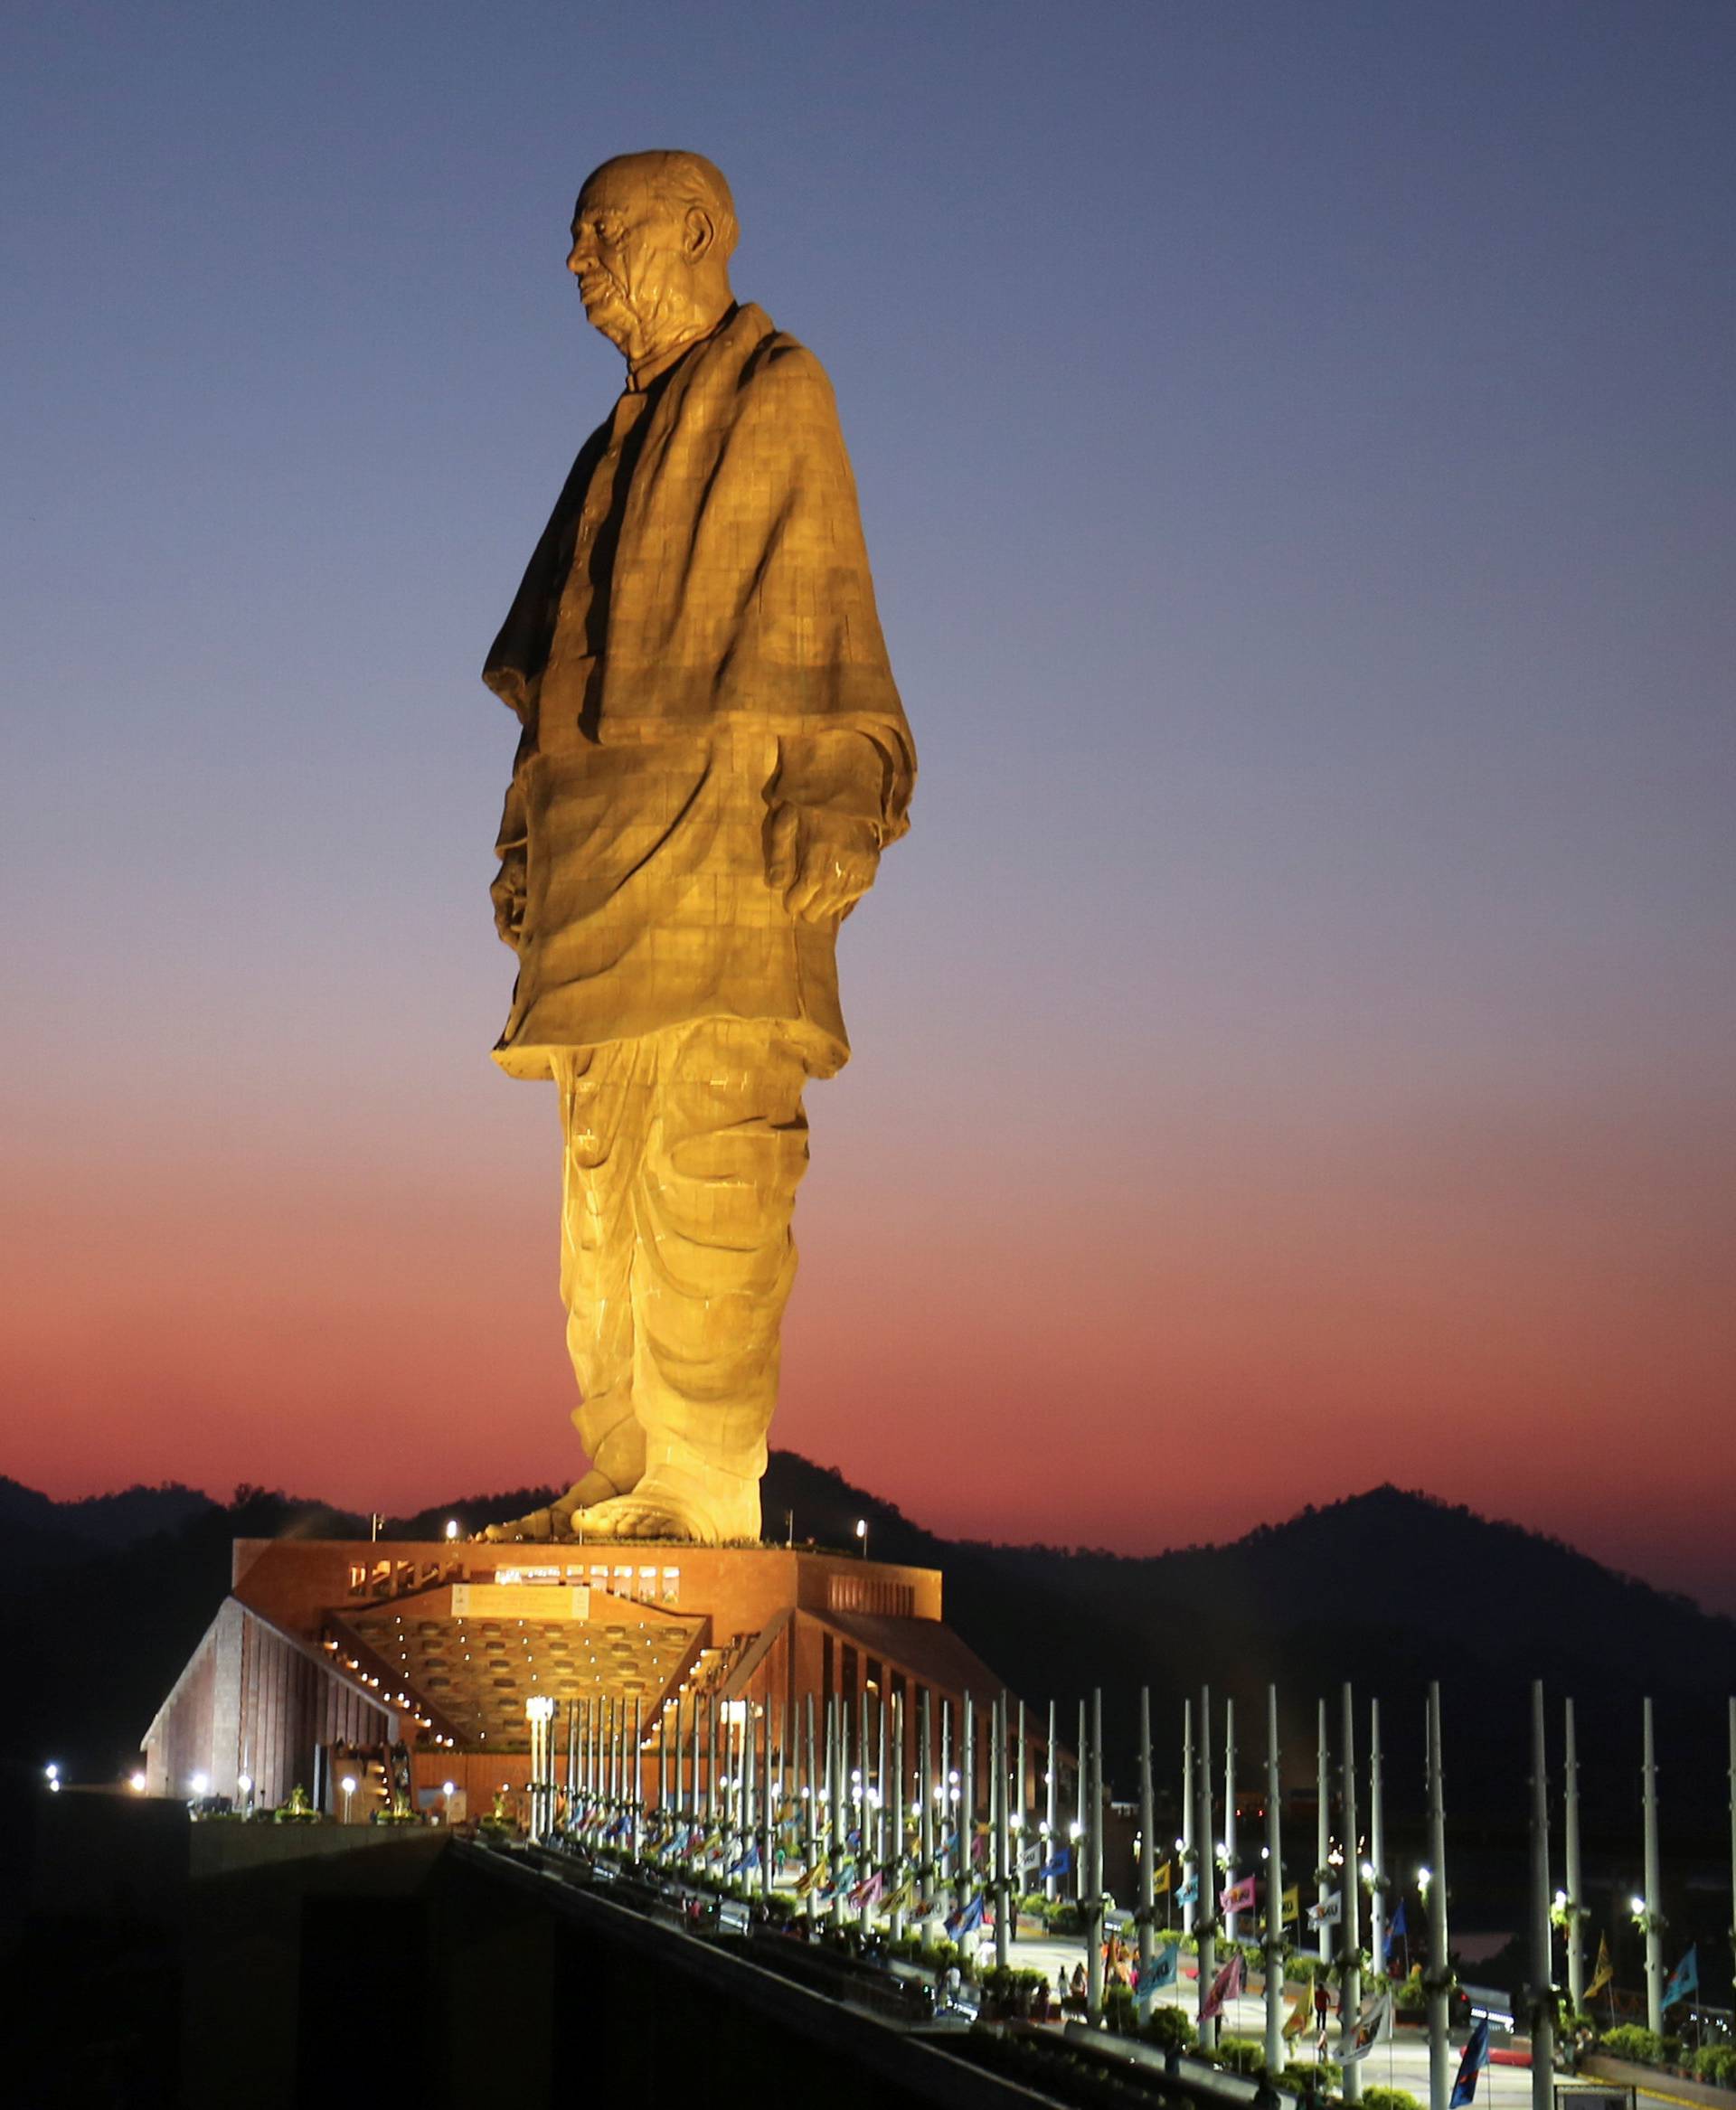 General view of the "Statue of Unity" portraying Sardar Vallabhbhai Patel, one of the founding fathers of India, during its inauguration in Kevadia